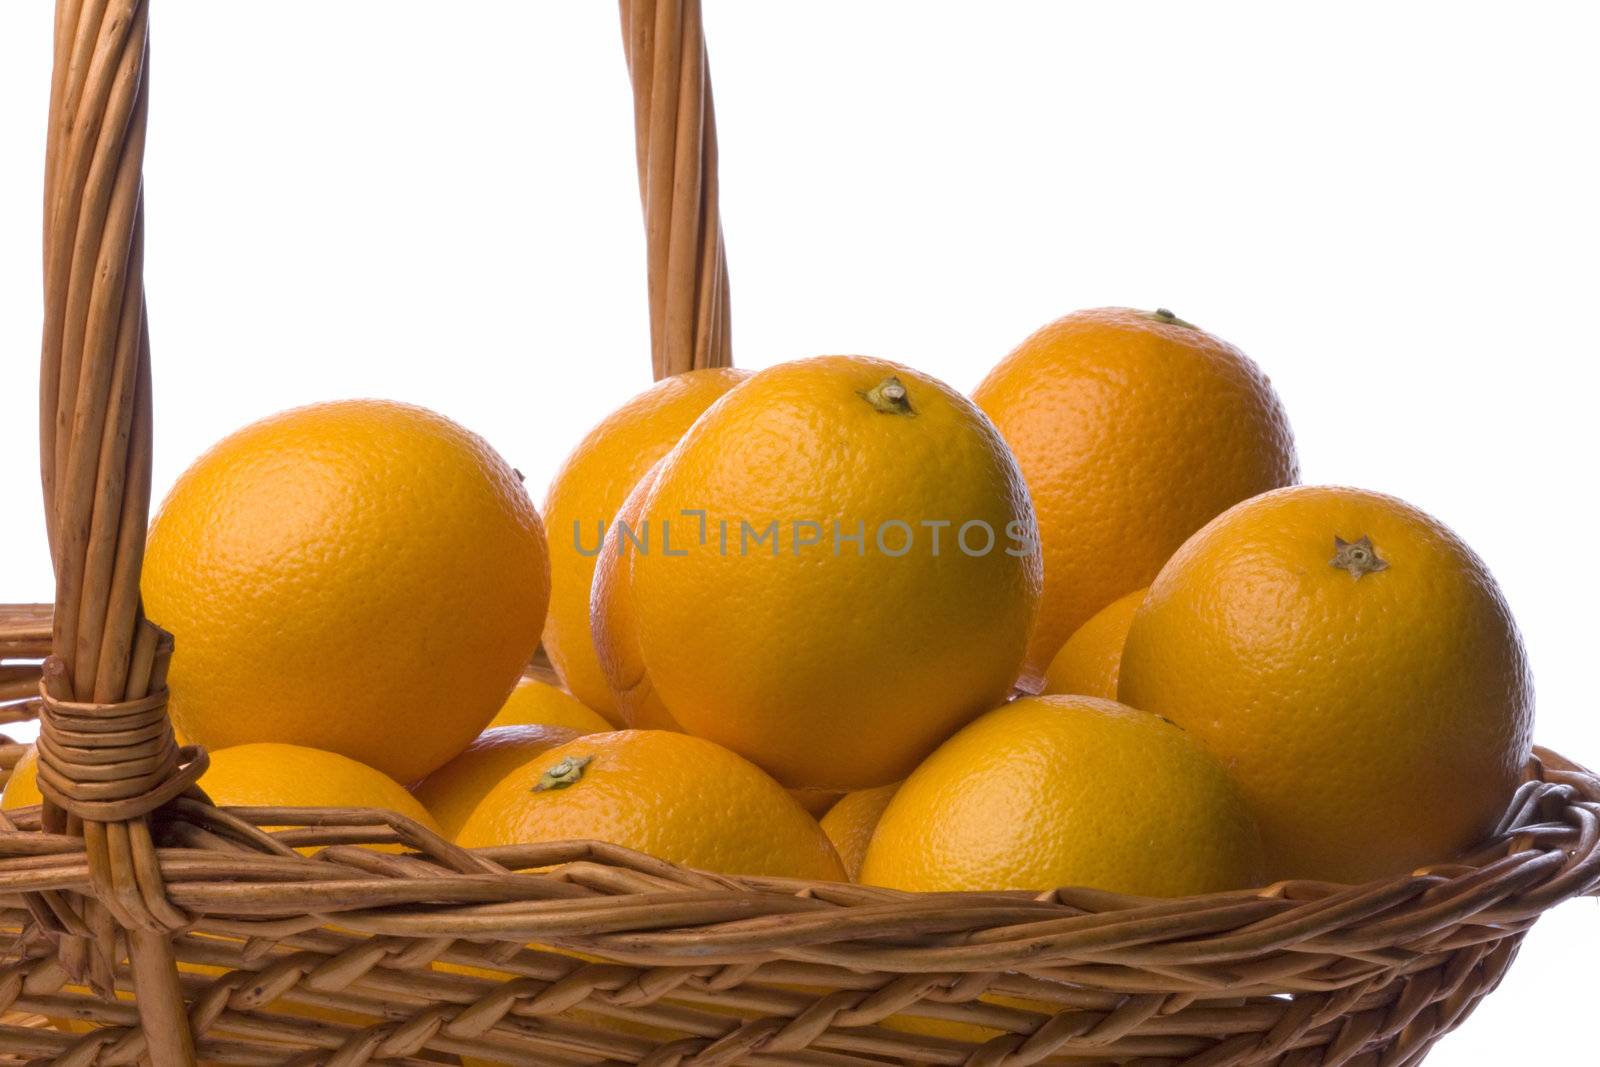 Isolated image of oranges in a basket against a completely white background.